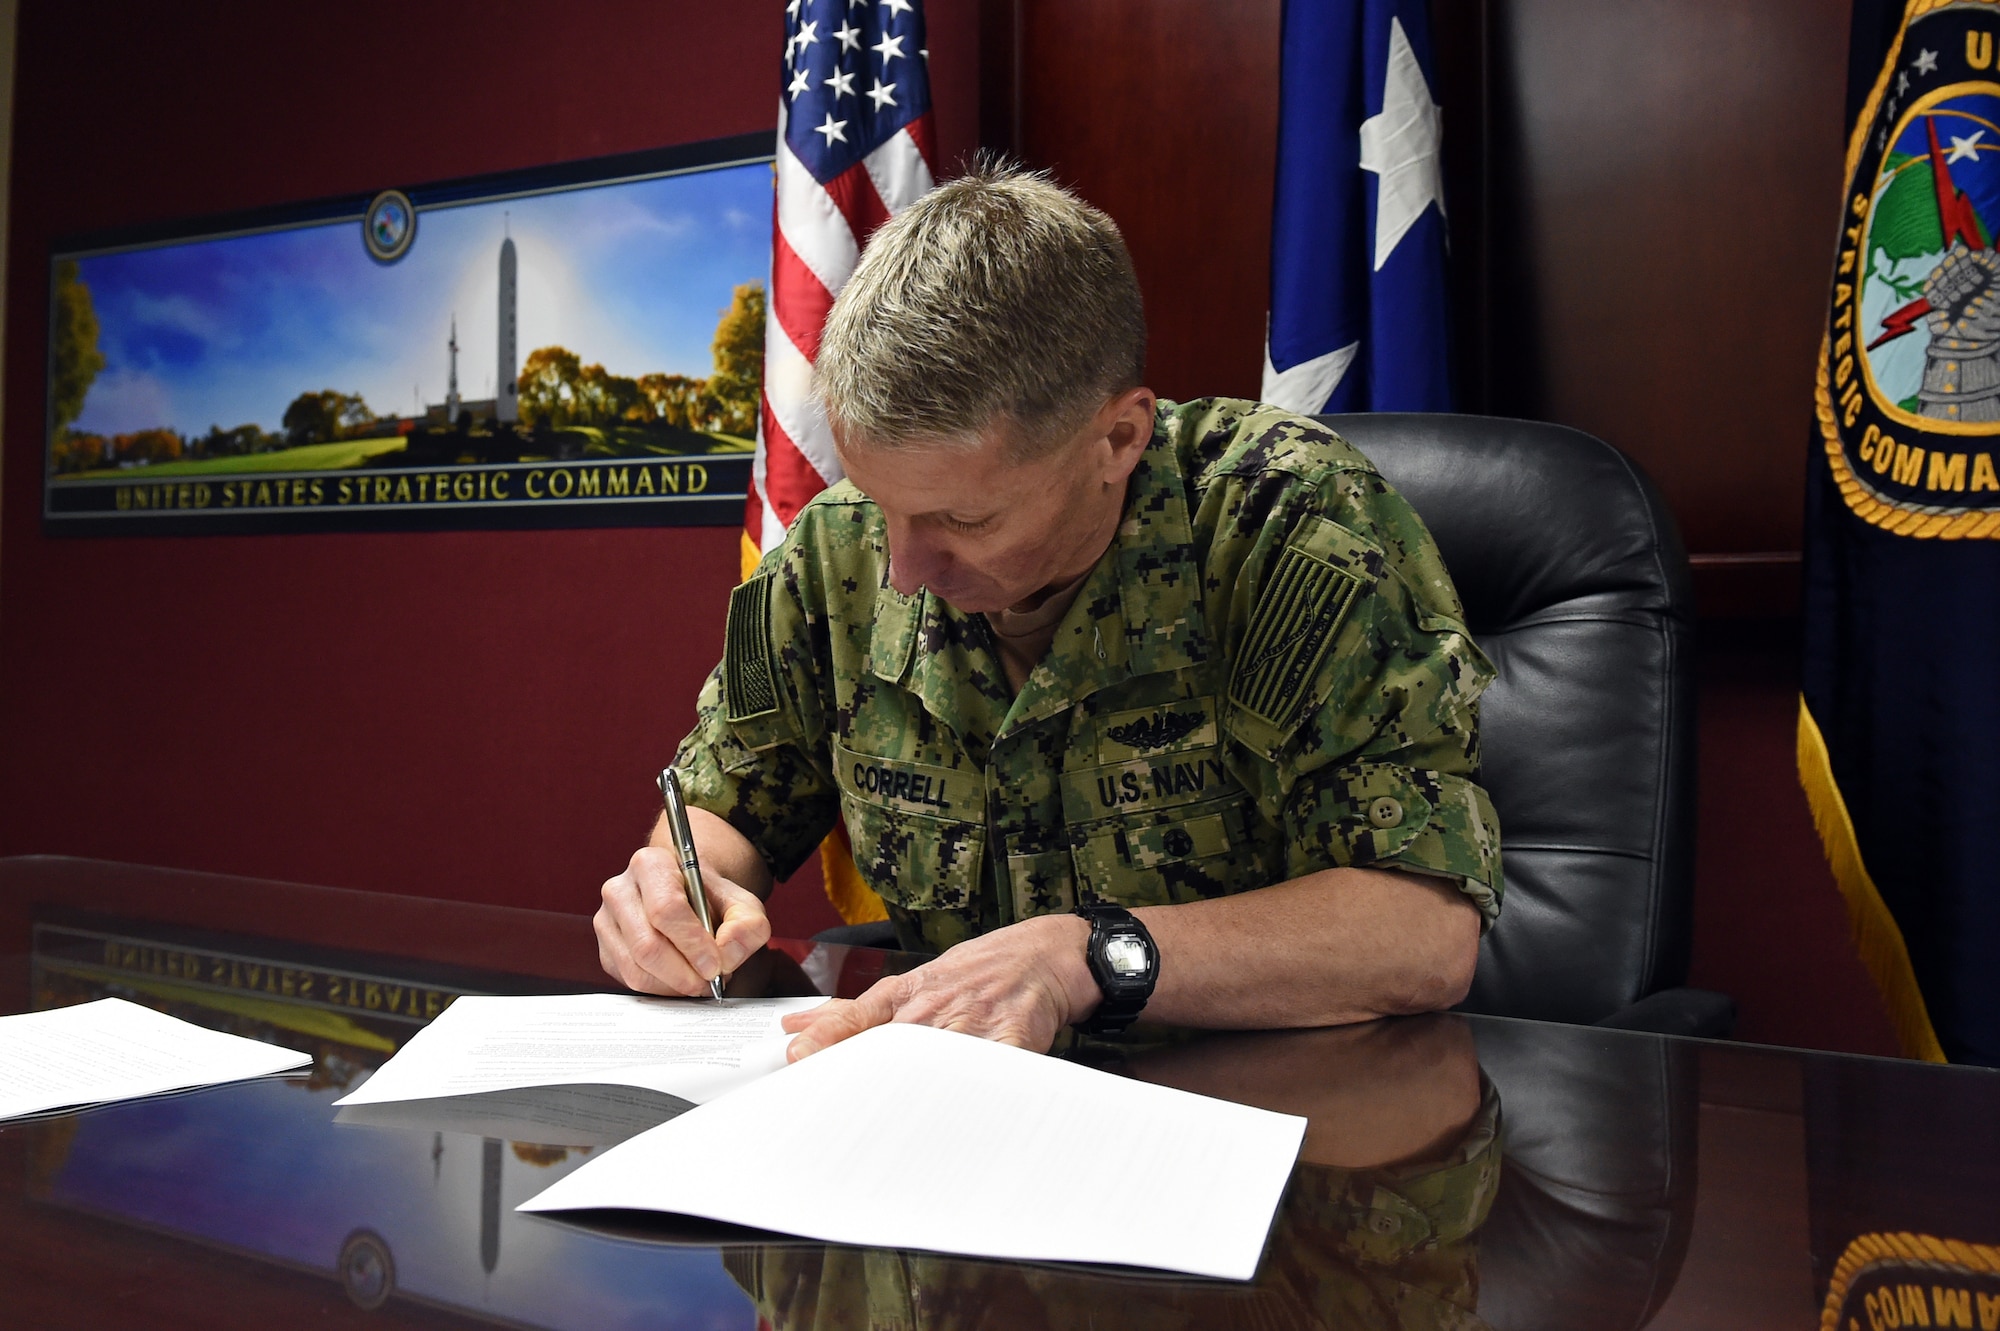 Rear Adm. Richard Correll, U.S. Strategic Command director of plans and policy, signs the United States-Romania Space Situational Awareness (SSA) agreement at USSTRATCOM Headquarters at Offutt Air Force Base, Neb., on April 4, 2019. SSA data-sharing agreements enhance multinational space cooperation and streamline the process for USSTRATCOM partners to request specific information gathered by USSTRATCOM’s Joint Space Operations Center at Vandenberg Air Force Base, Calif. The information is crucial for launch support, satellite maneuver planning, support for on-orbit anomalies, electromagnetic interference reporting and investigation, satellite decommissioning activities and on-orbit conjunction assessments.